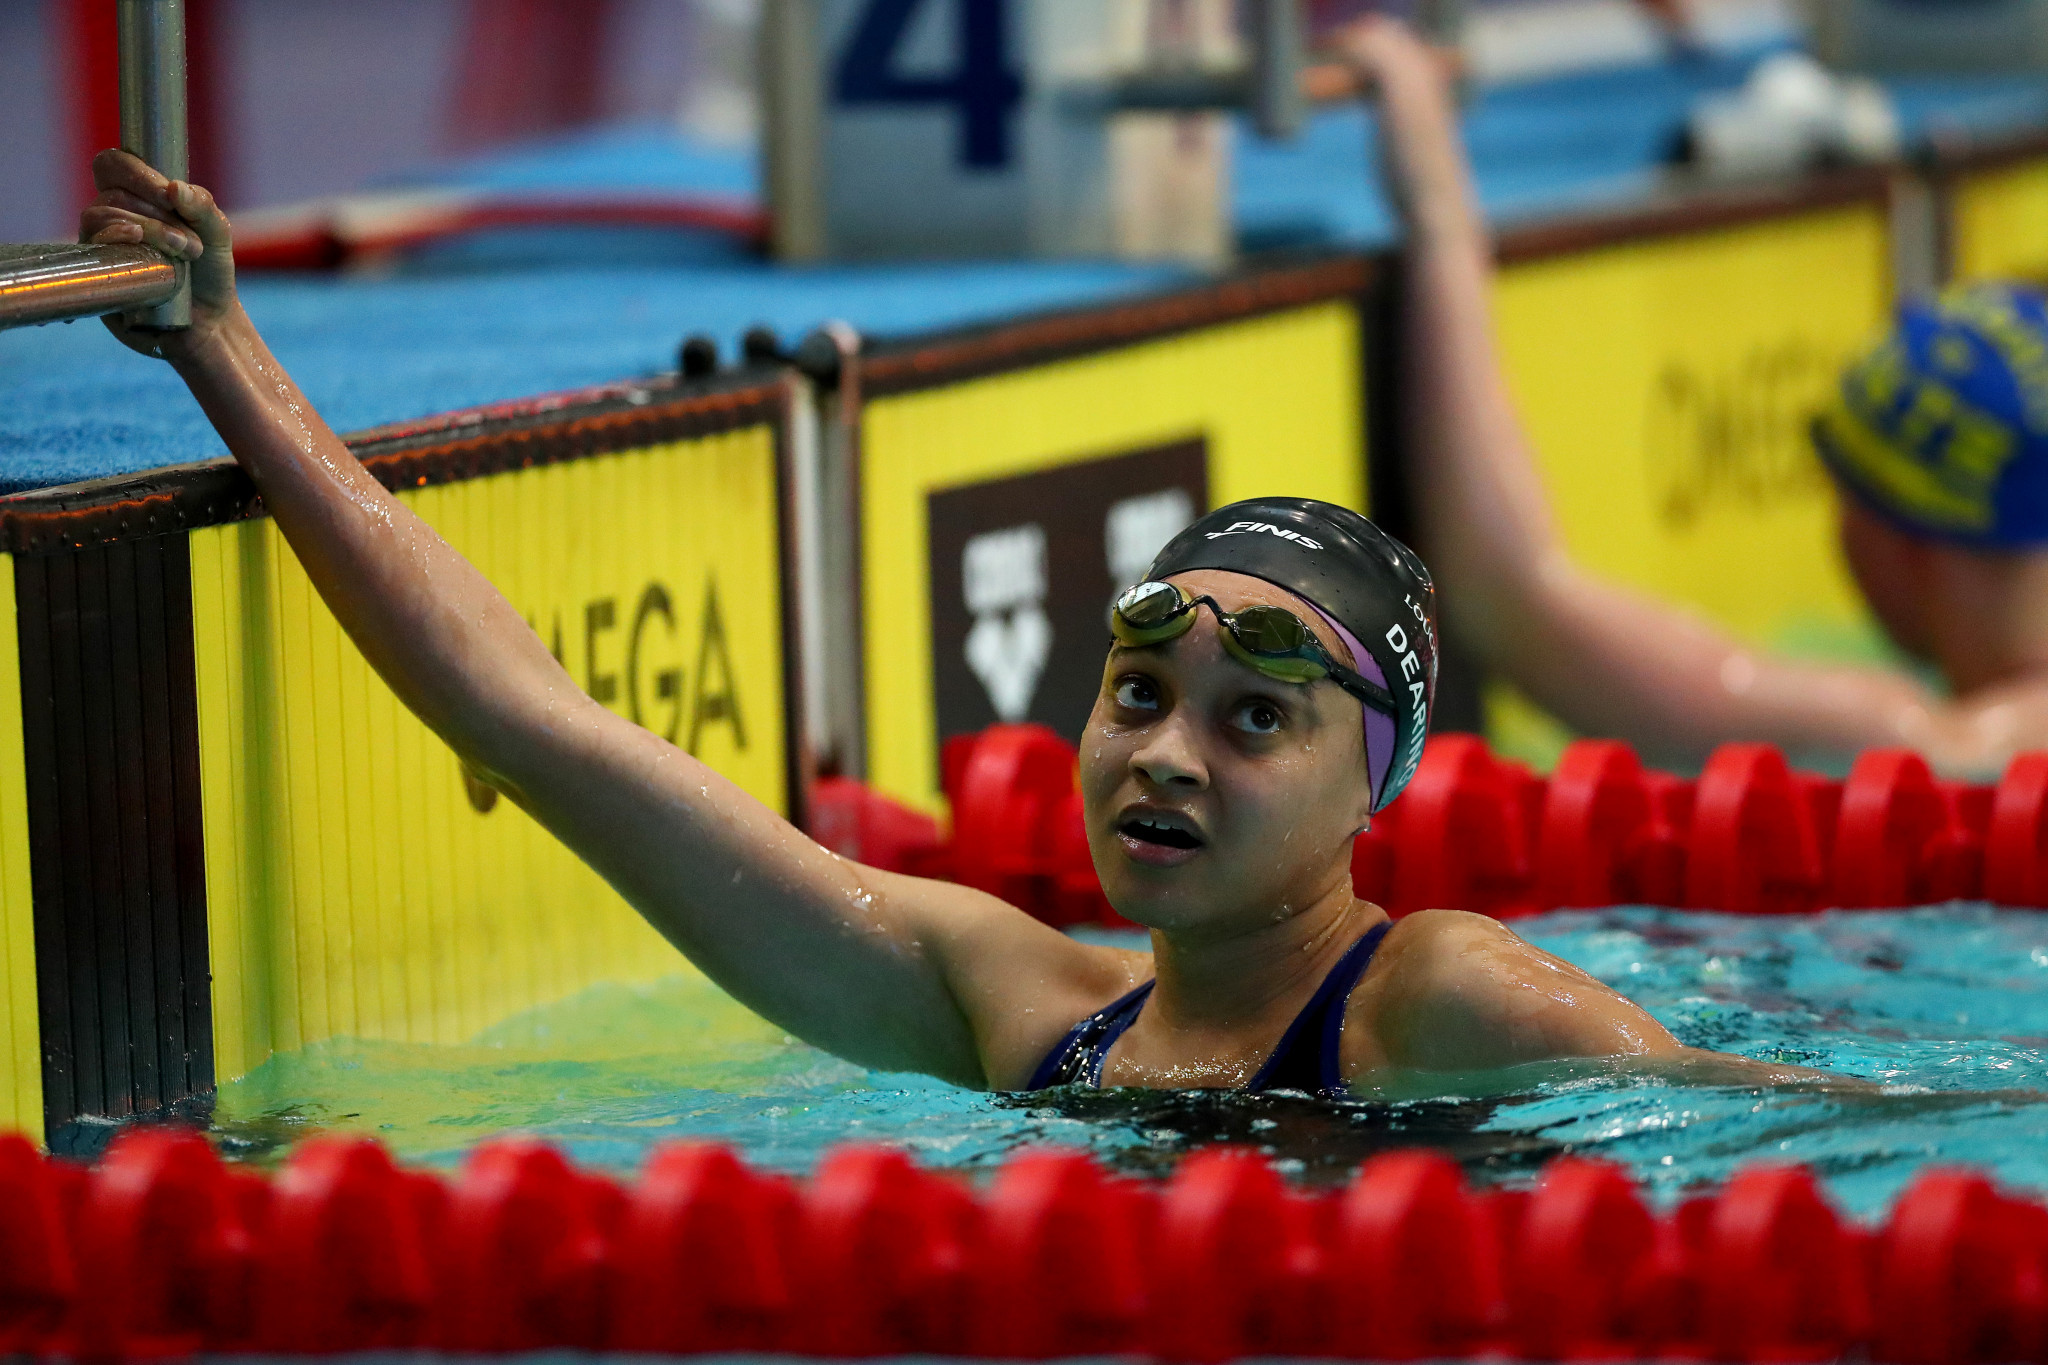 British swimmer Alice Dearing previously partnered with the brand ©Getty Images